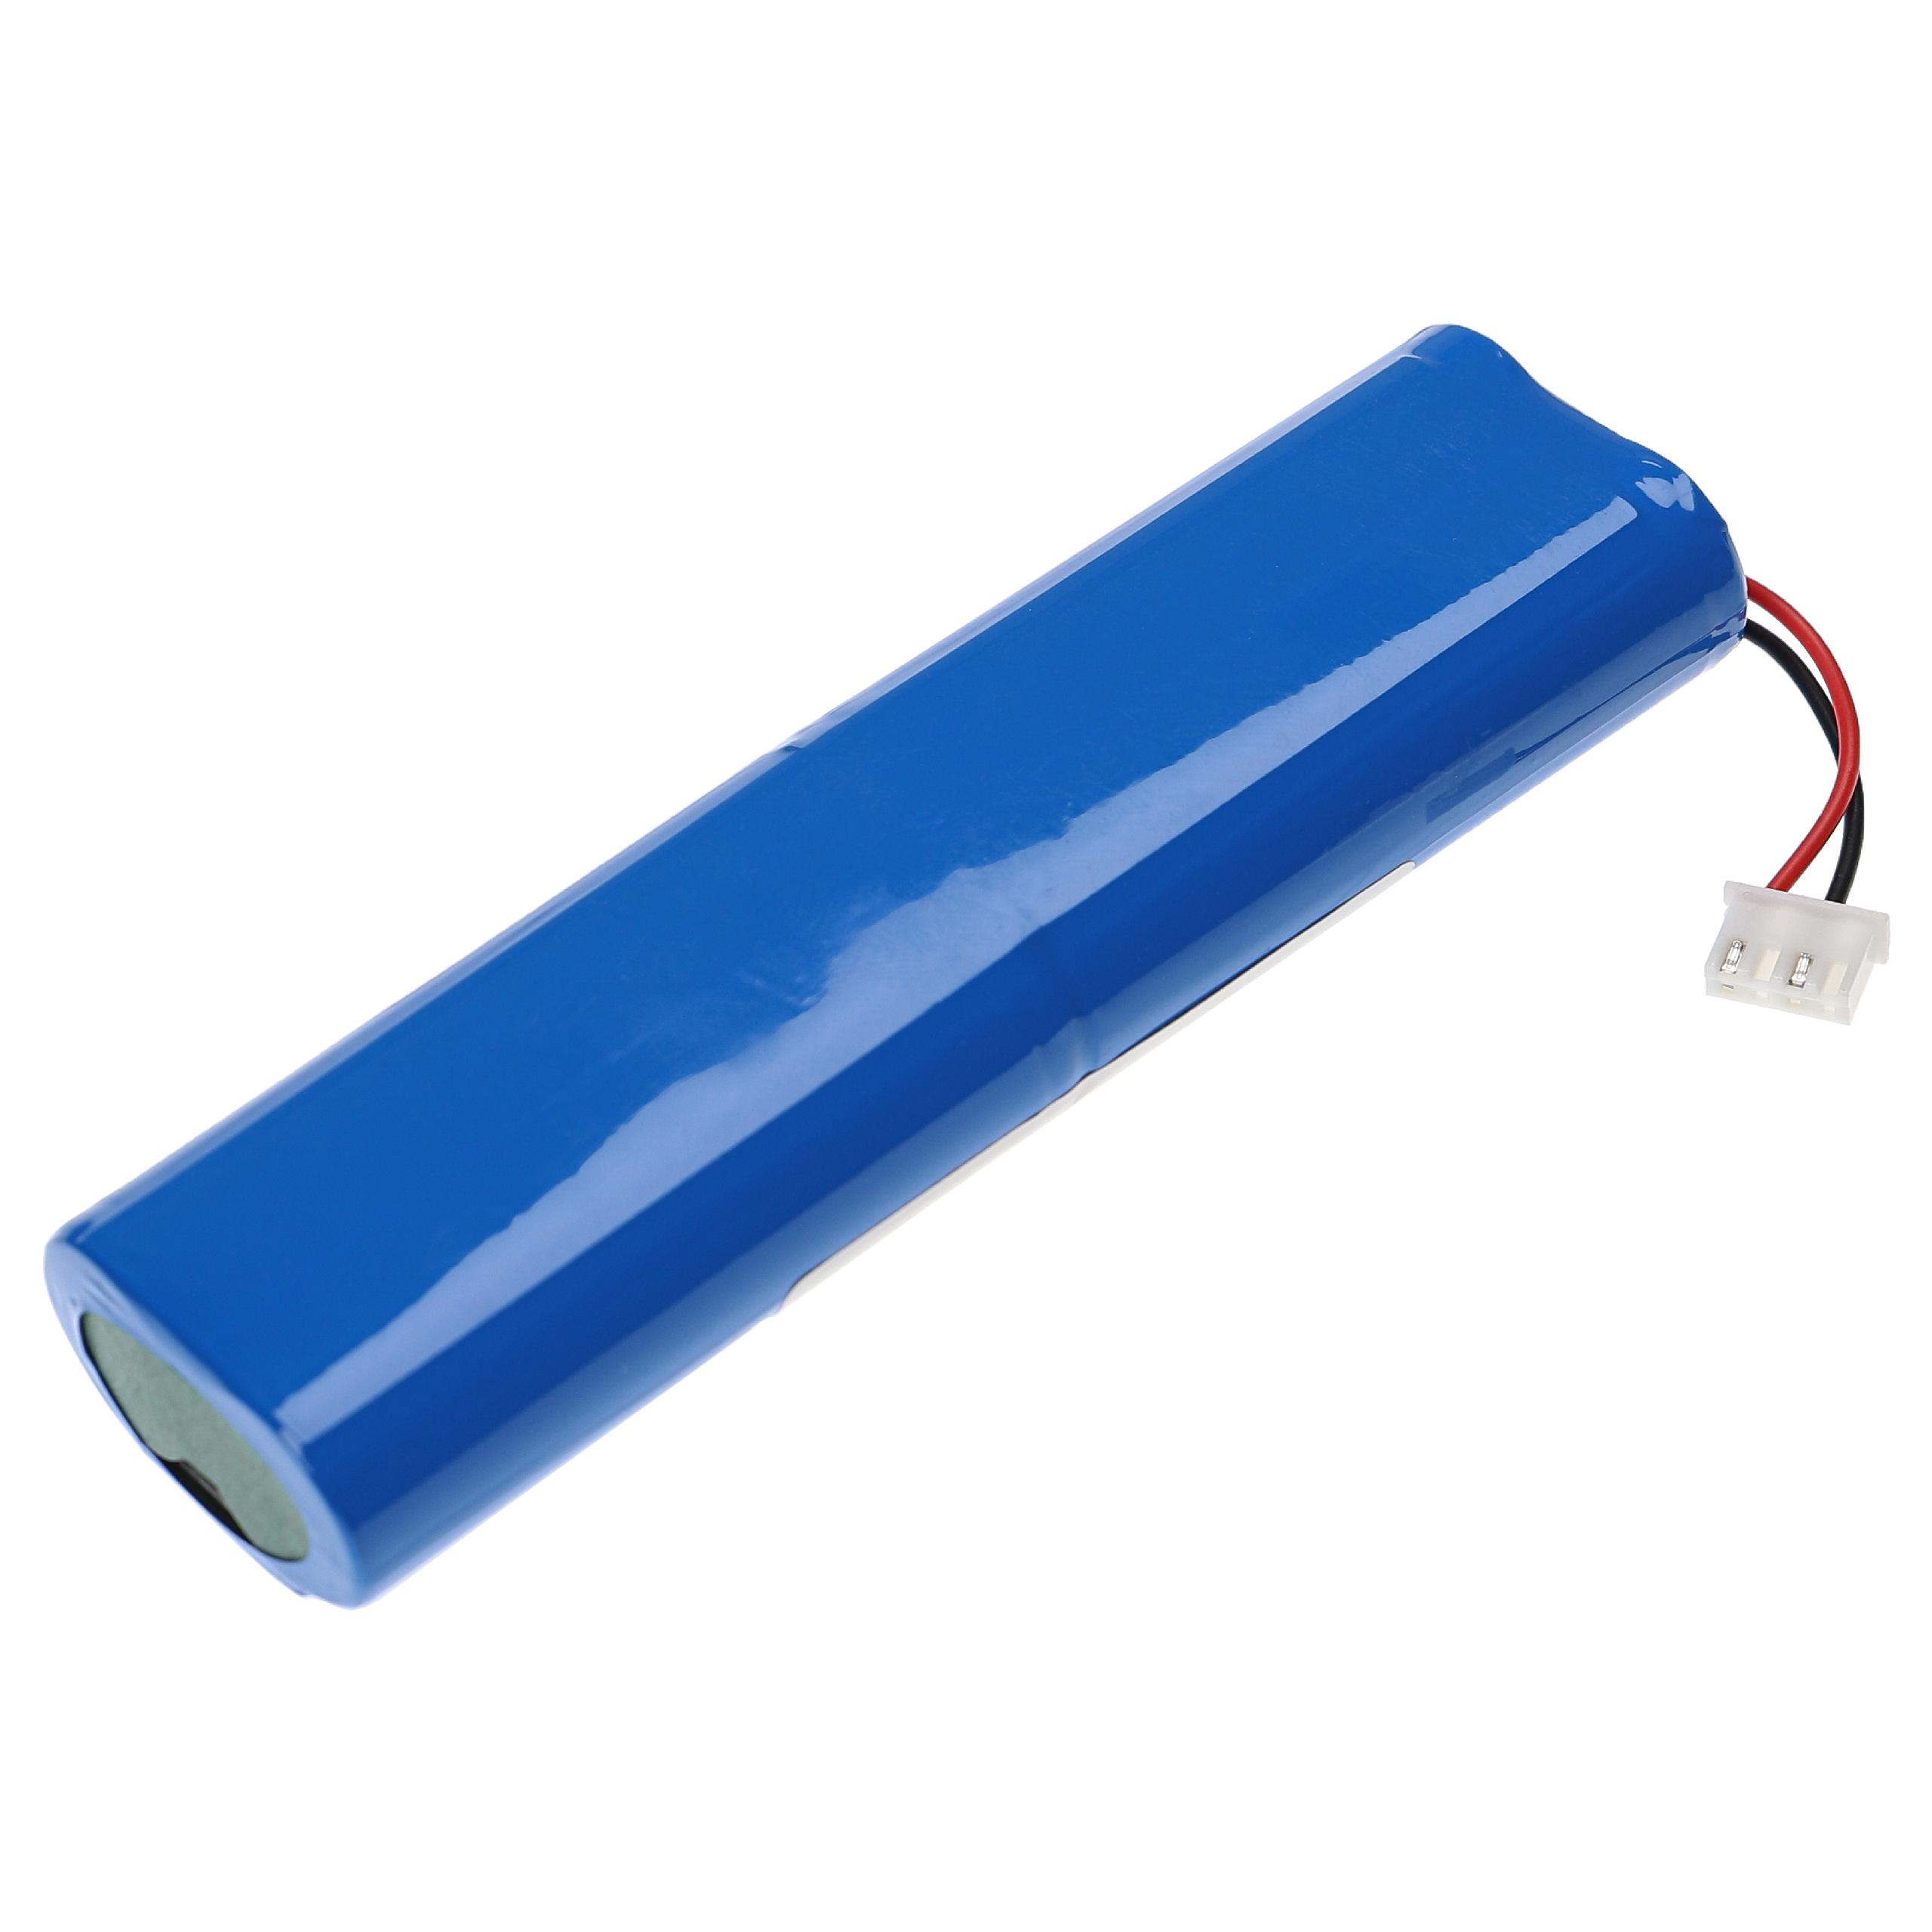 Battery Replacement for Ecovacs S08-LI-144-2500 for - 3400mAh, 14.4V, Li-Ion